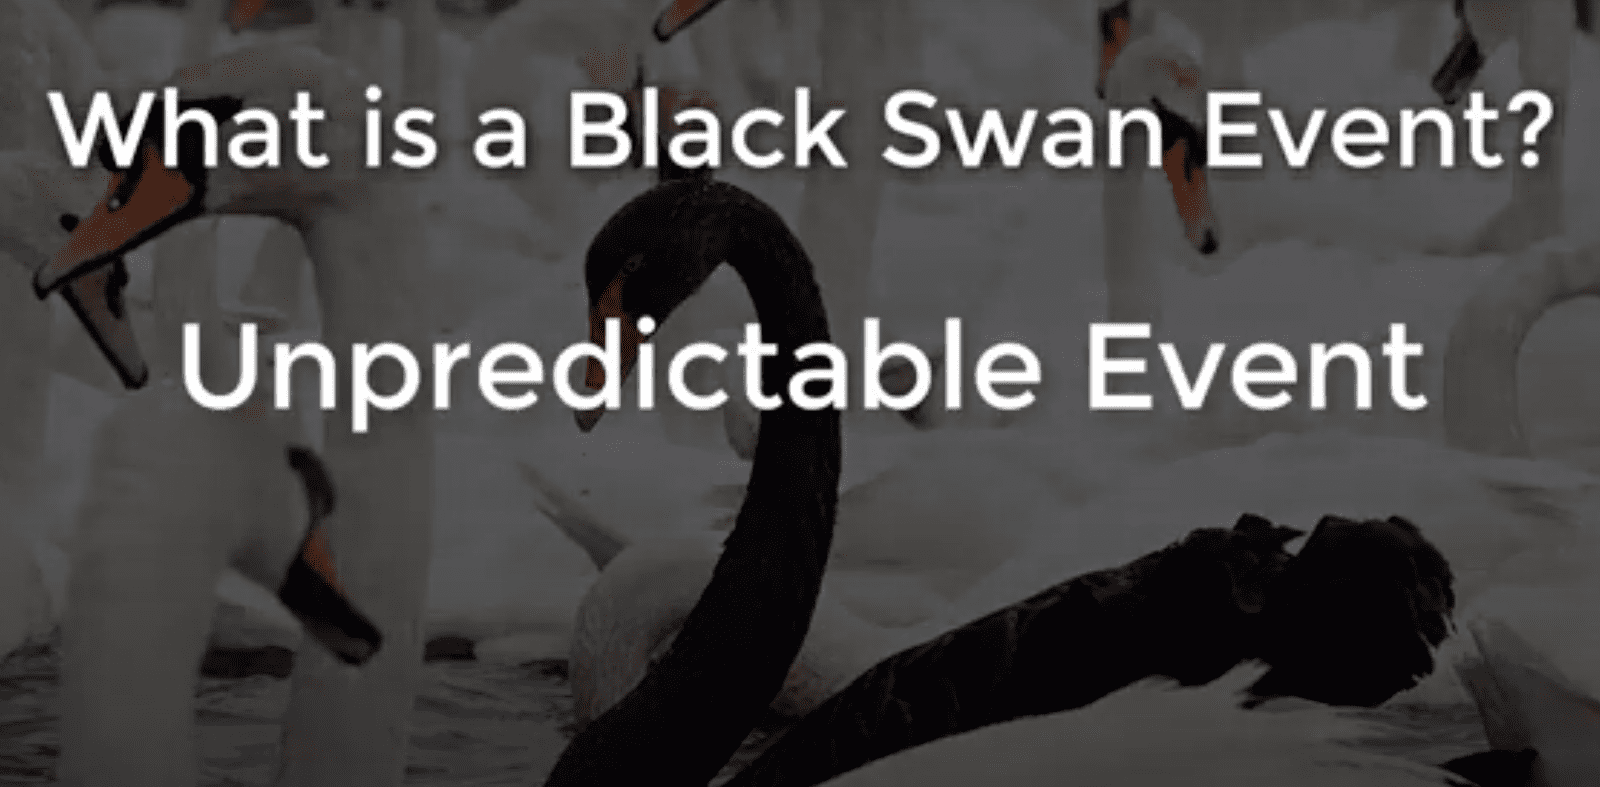 The impact of a "Black Swan" event